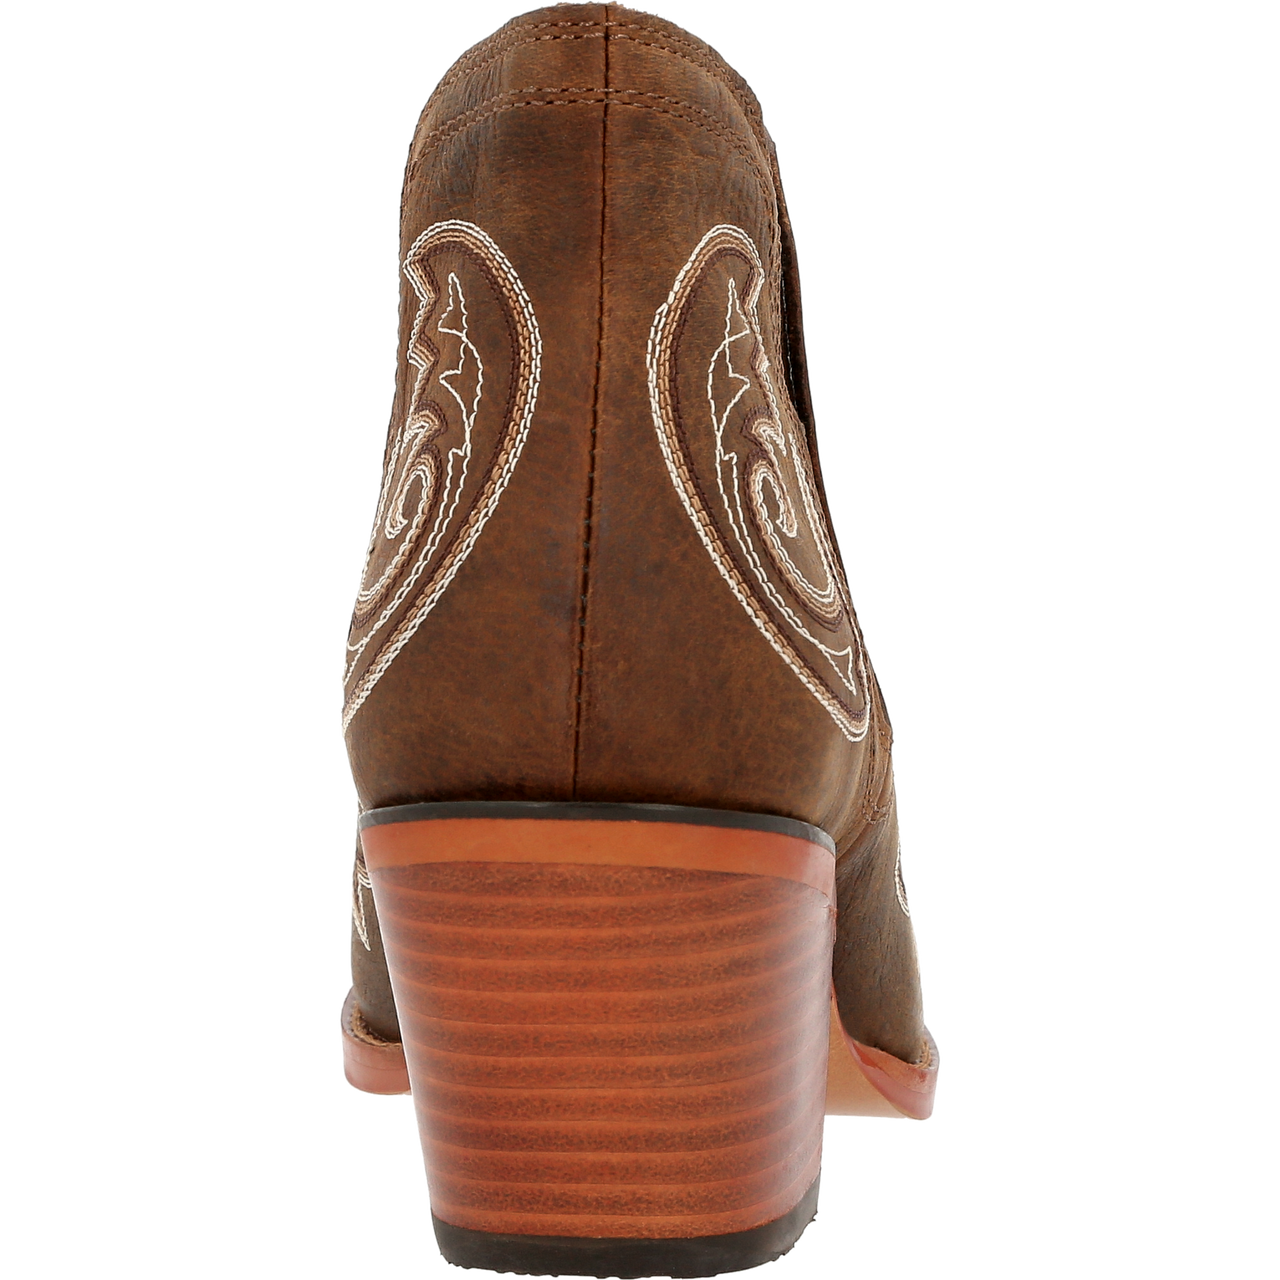 CRUSH BY DURANGO 6" WOMEN'S COFFEE BROWN WESTERN BOOTS DRD0399